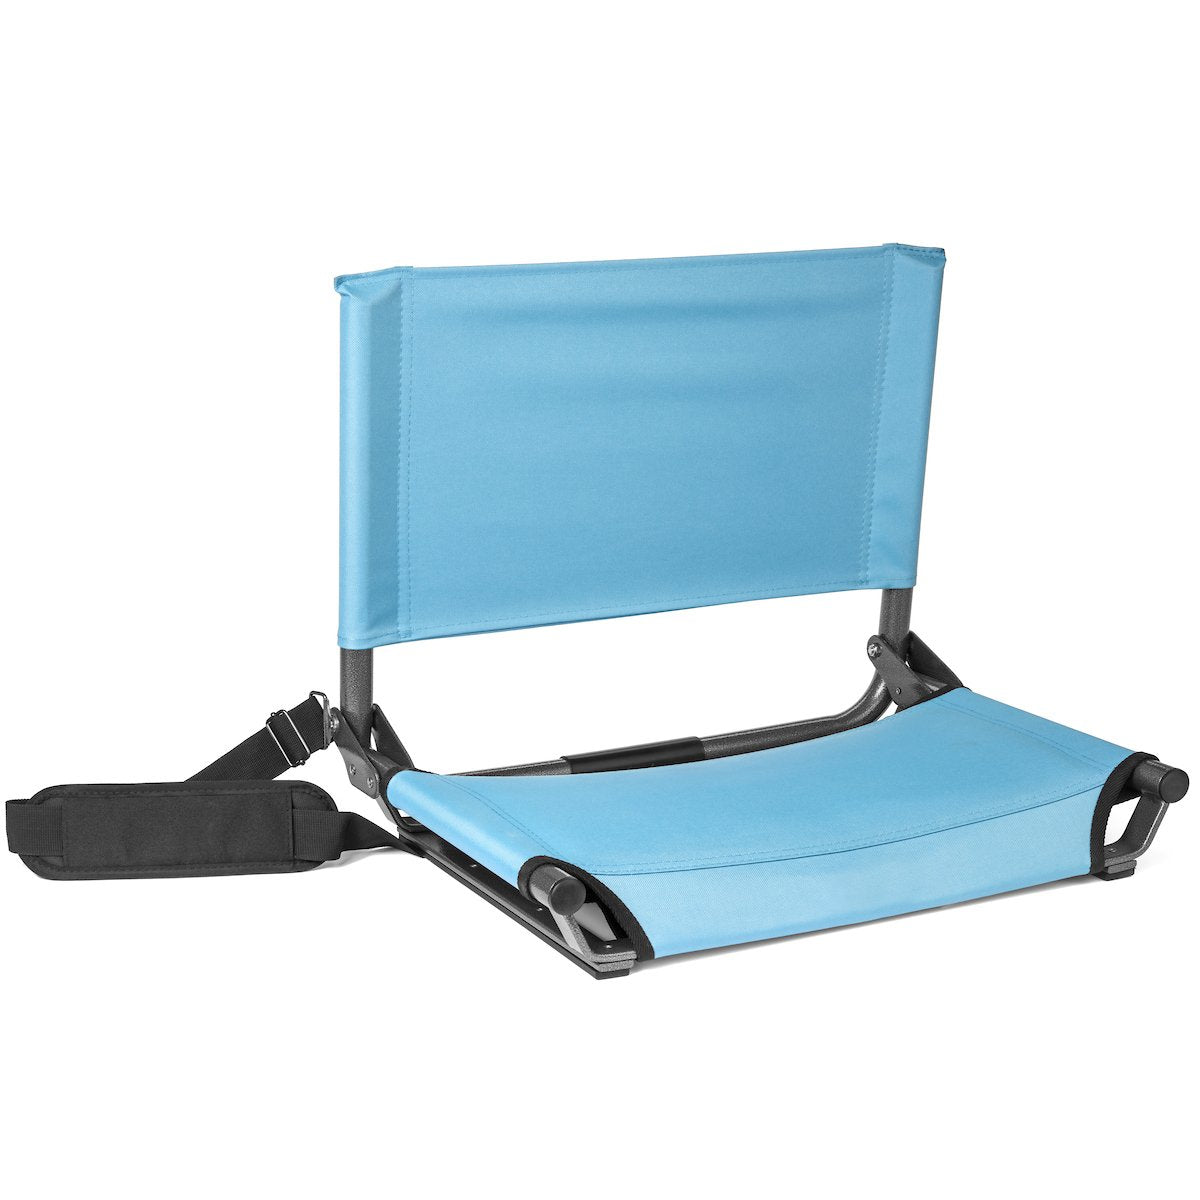 Stadium Seats with Back Support – Cascade Mountain Tech